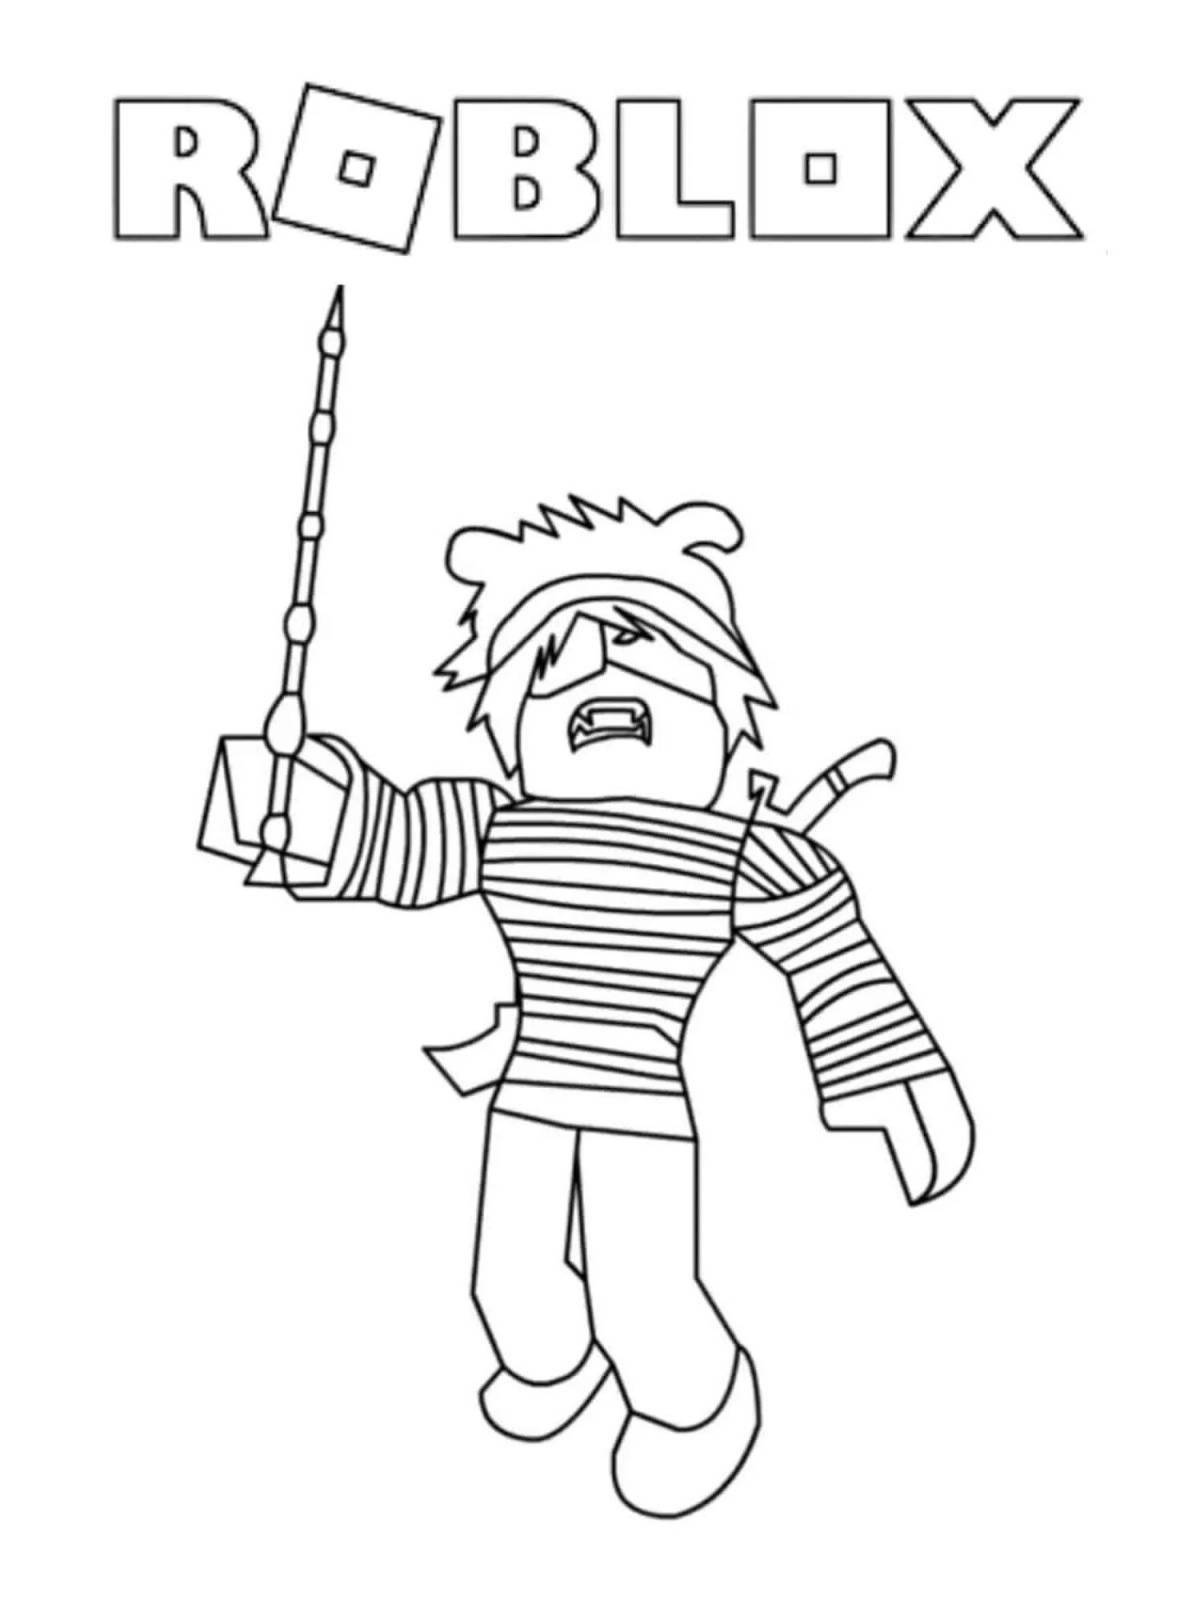 Joyful robloxers coloring pages